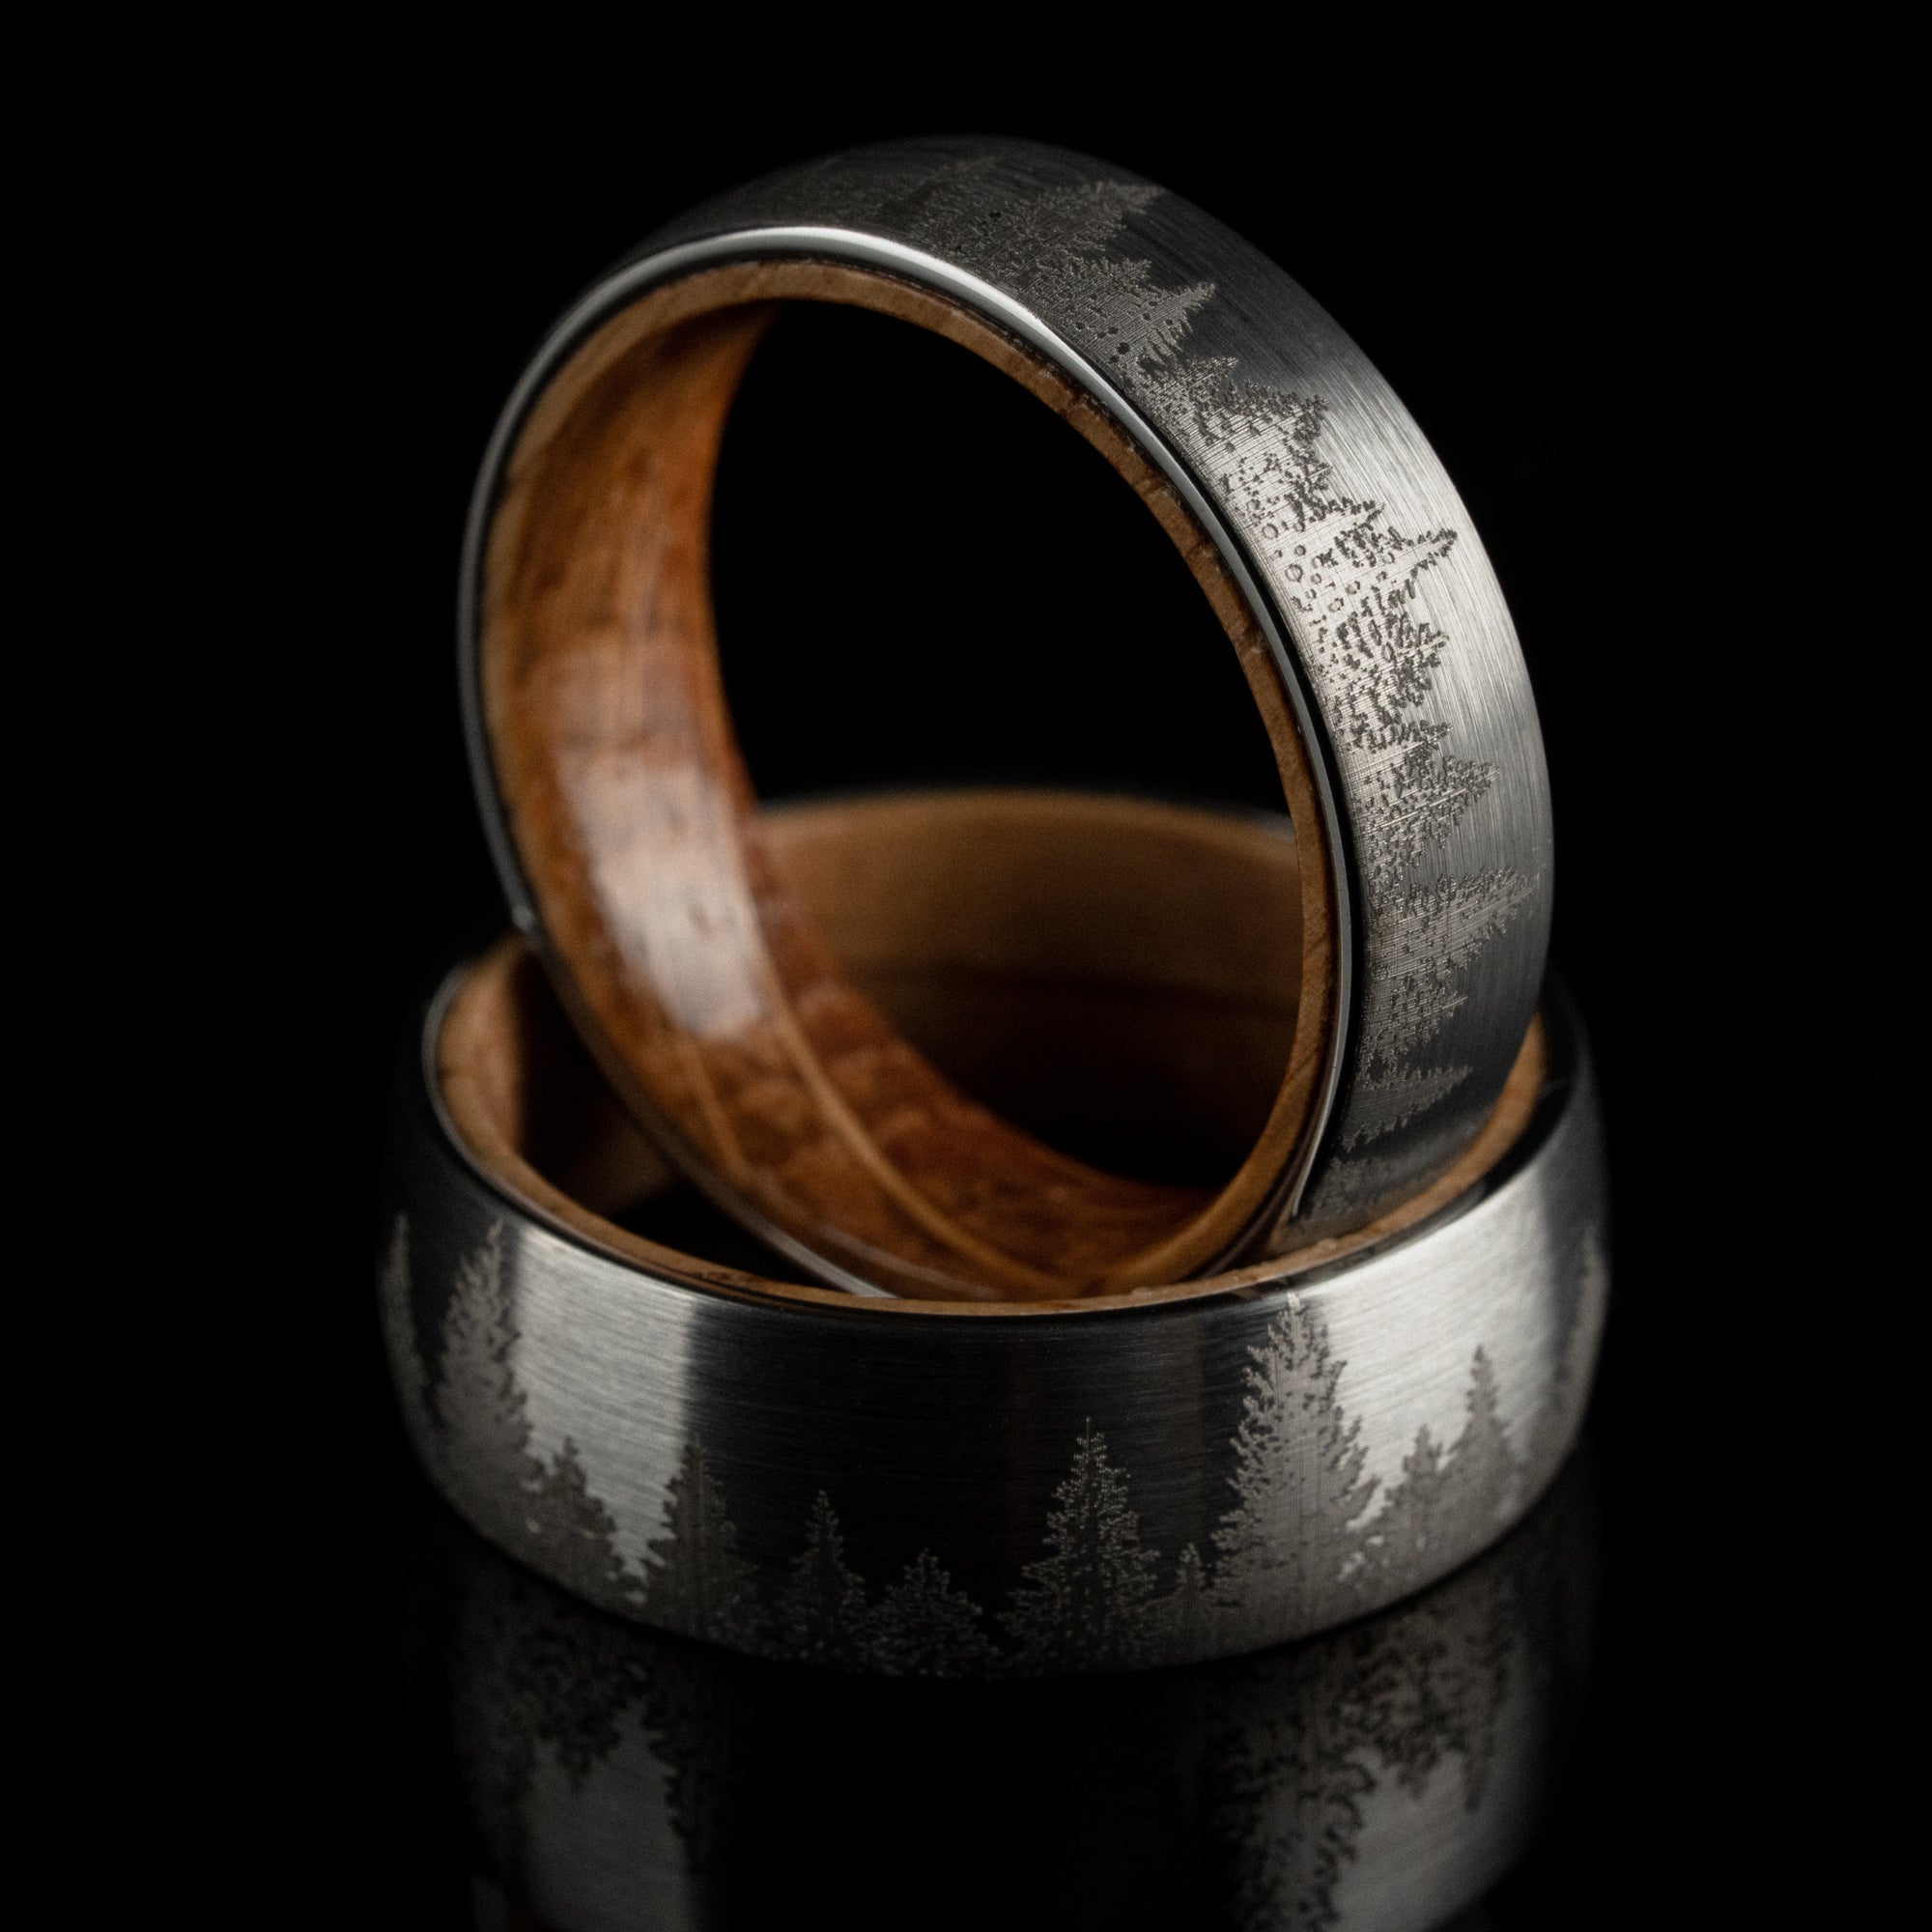 The “Outdoorsman” Ring